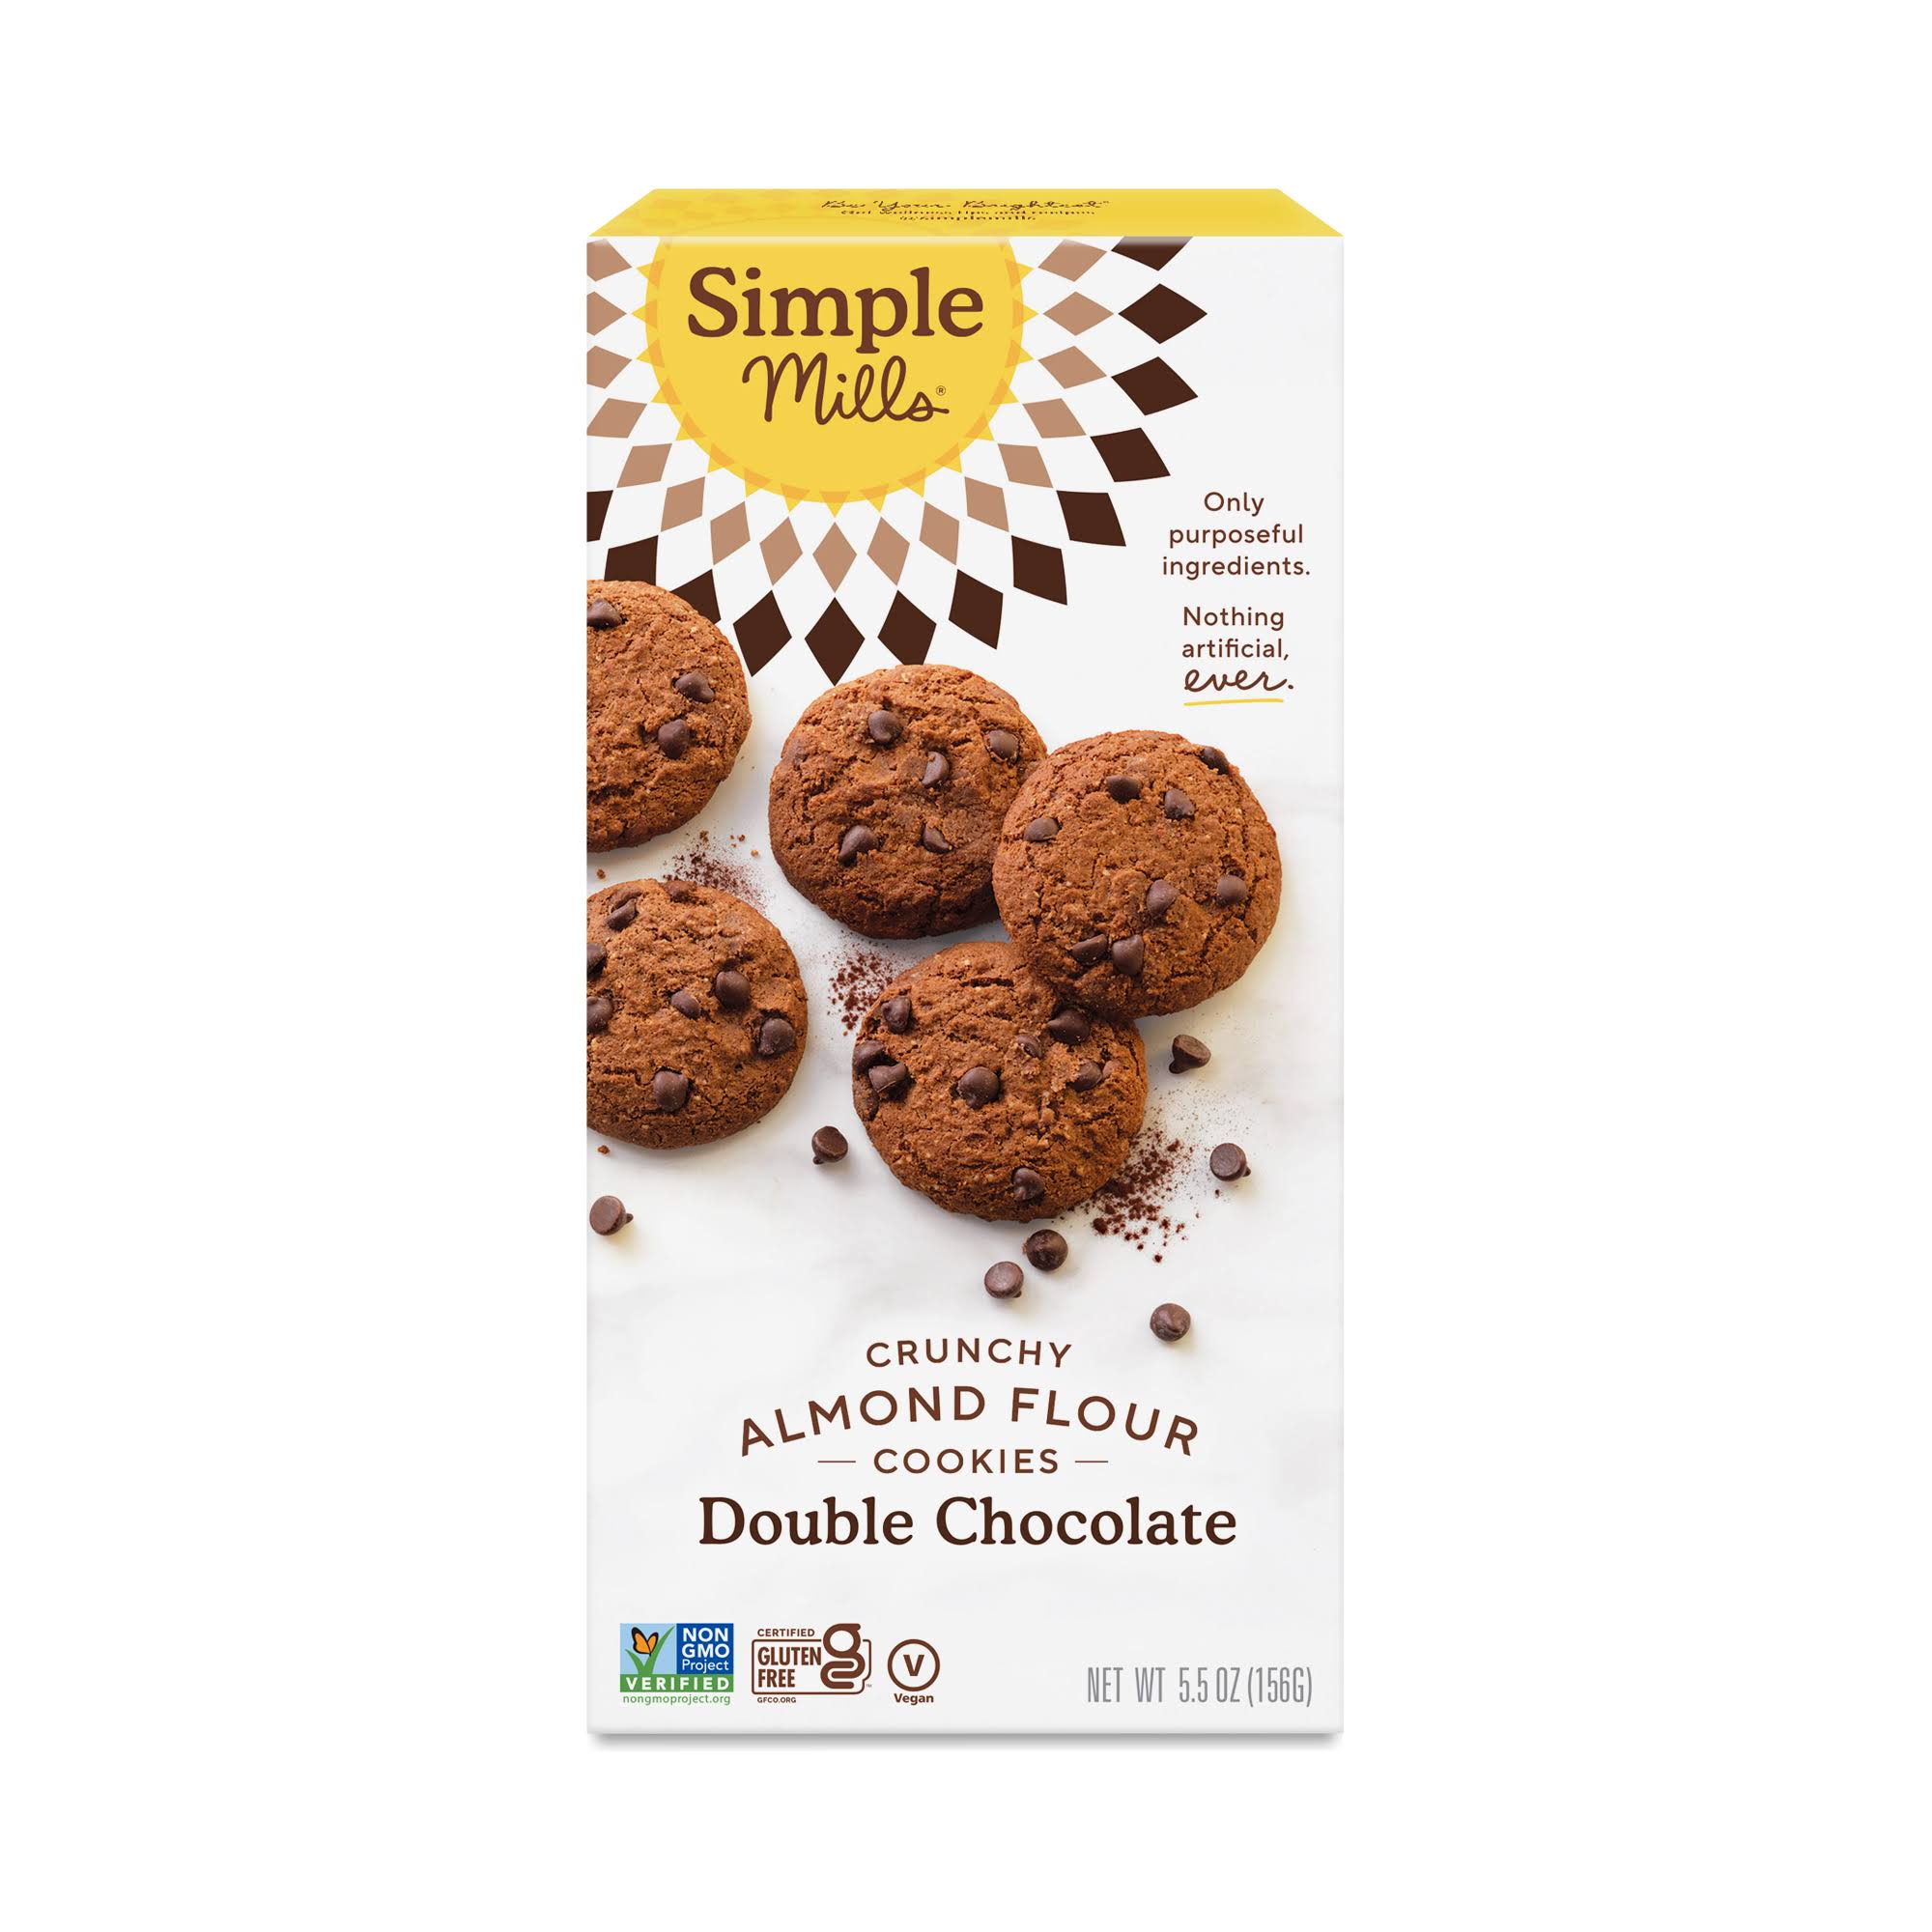 Simple Mills Naturally Gluten Crunchy Cookies - Double Chocolate, 5.5oz